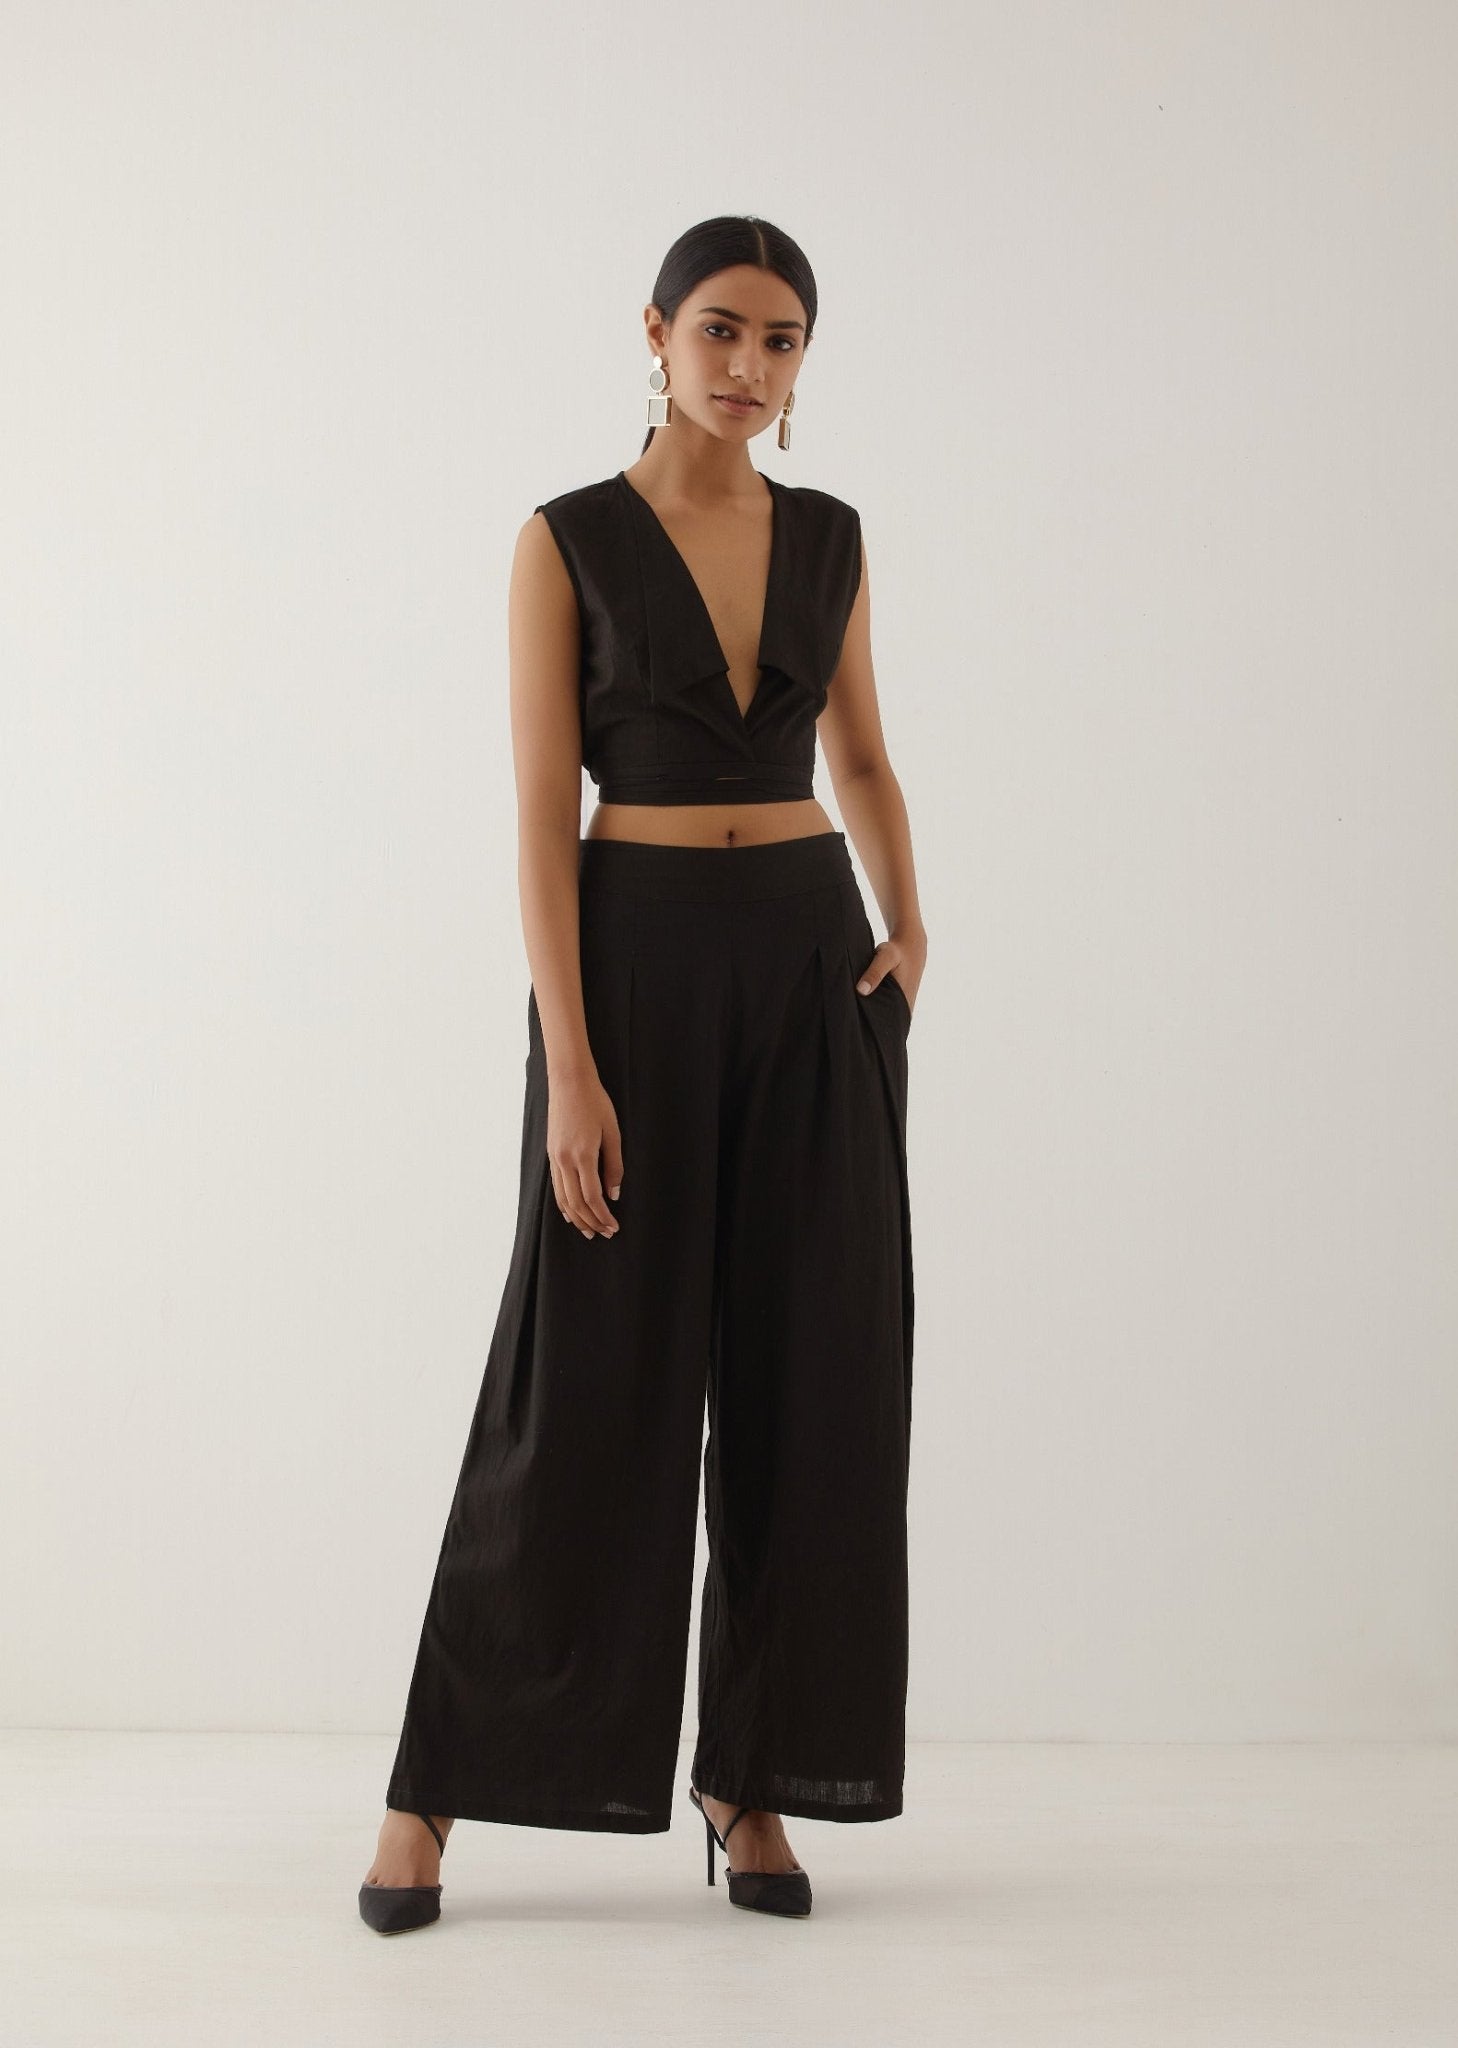 Black Collared Crop Top - The Indian Cause